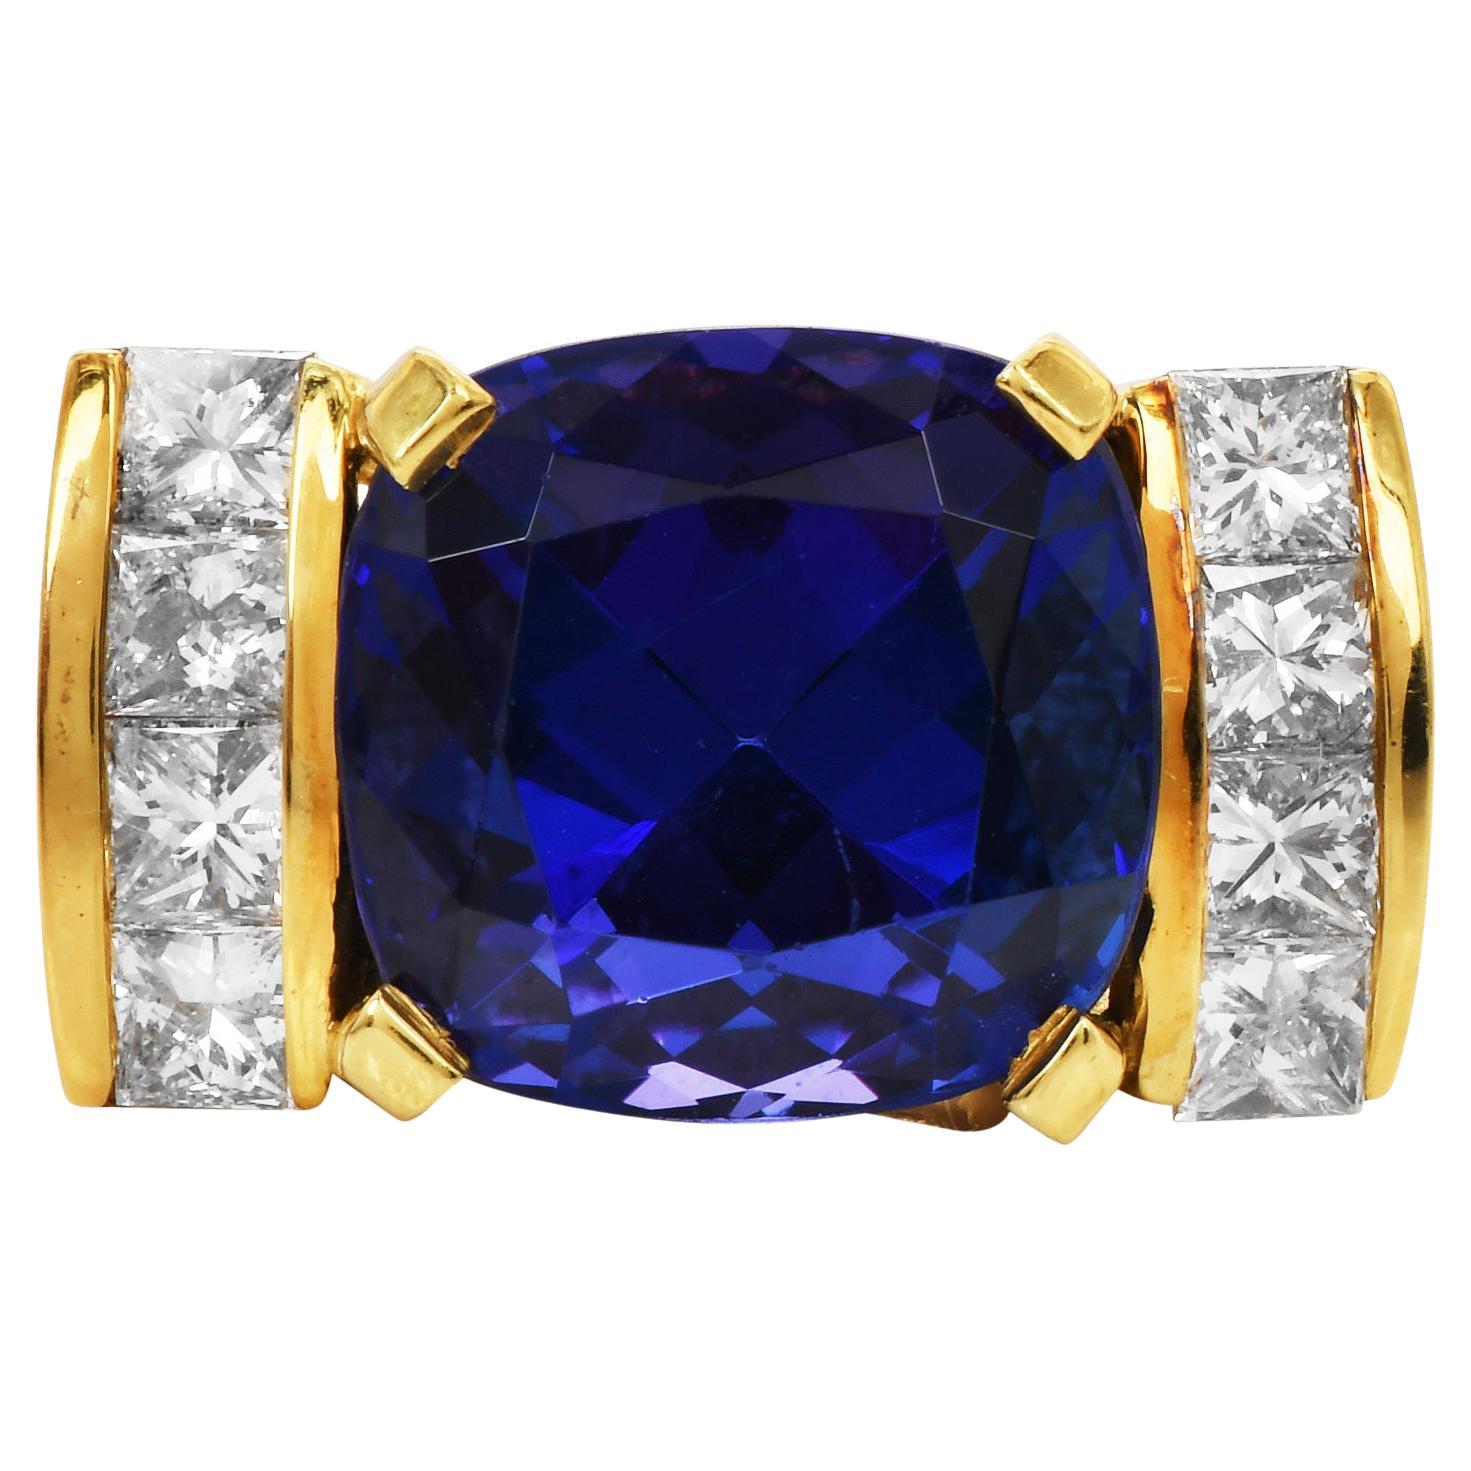 This statement ring is crafted in 18K Yellow Gold, the gold setting provides a warm and luxurious backdrop for the gemstones.

The centerpiece of the ring is a captivating approx. 18.00cts Square Cushion cut Genuine Tanzanite gemstone. Tanzanite is